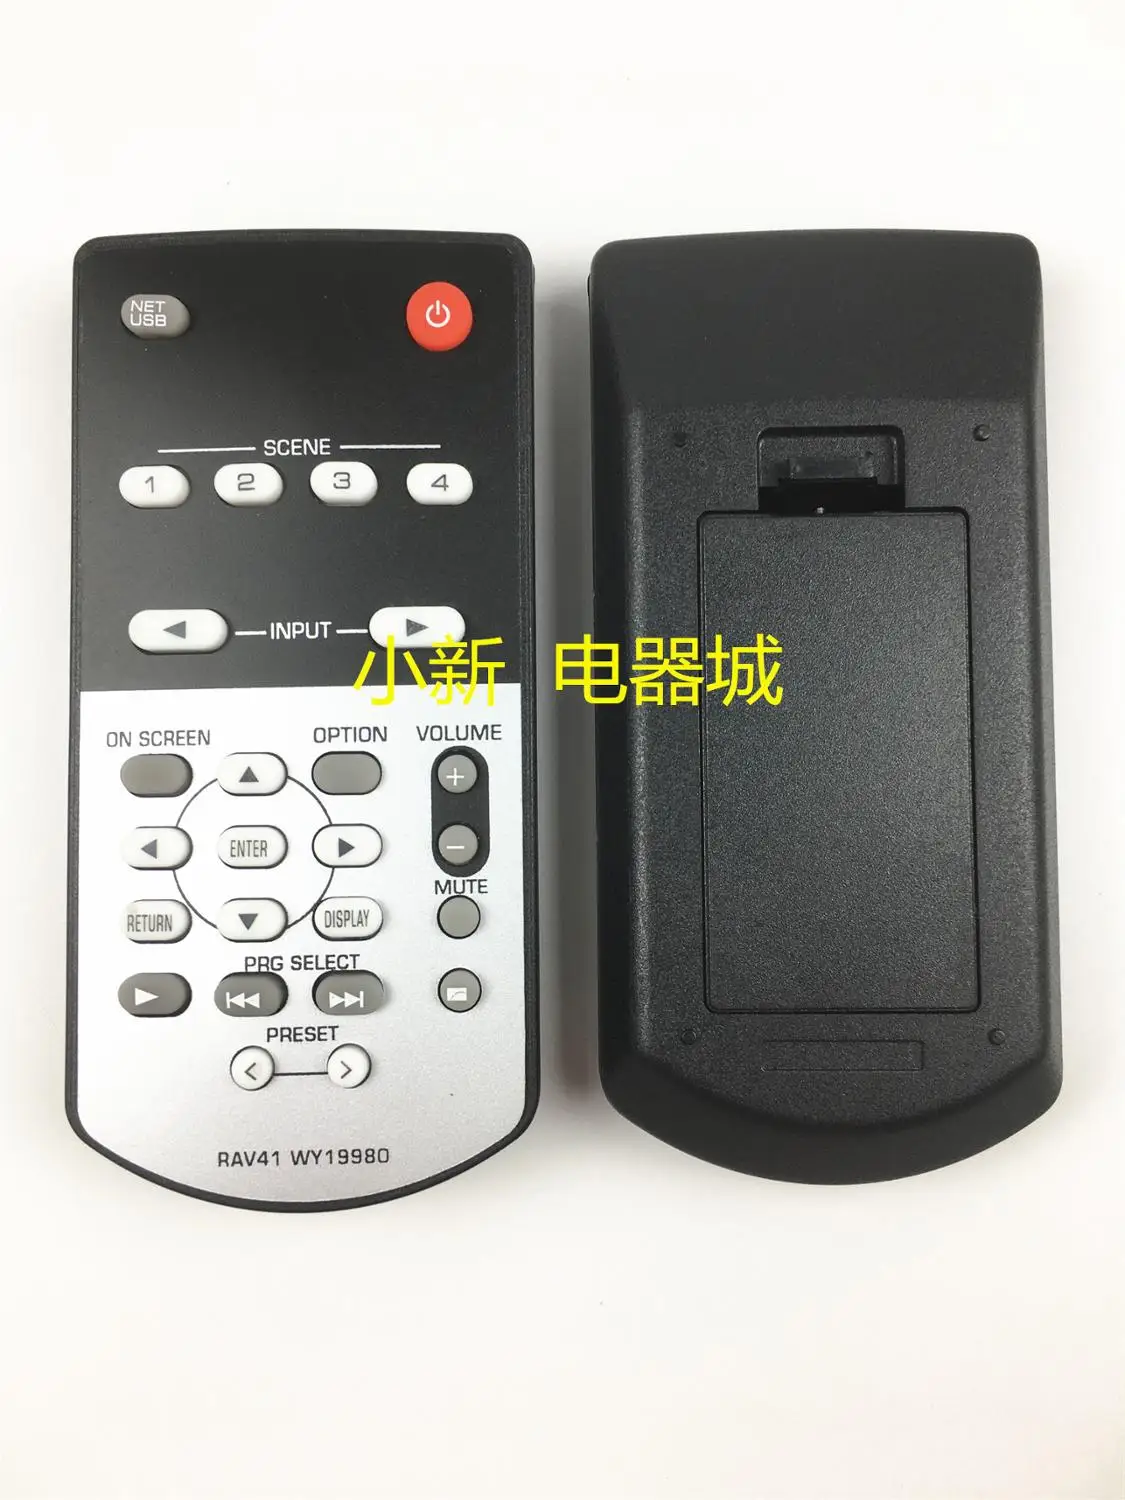 

New Replace Remote Control RAV41 WY19980 For Yamaha AV Receiver RX-A2010 RX-A2010BL RX-A3010